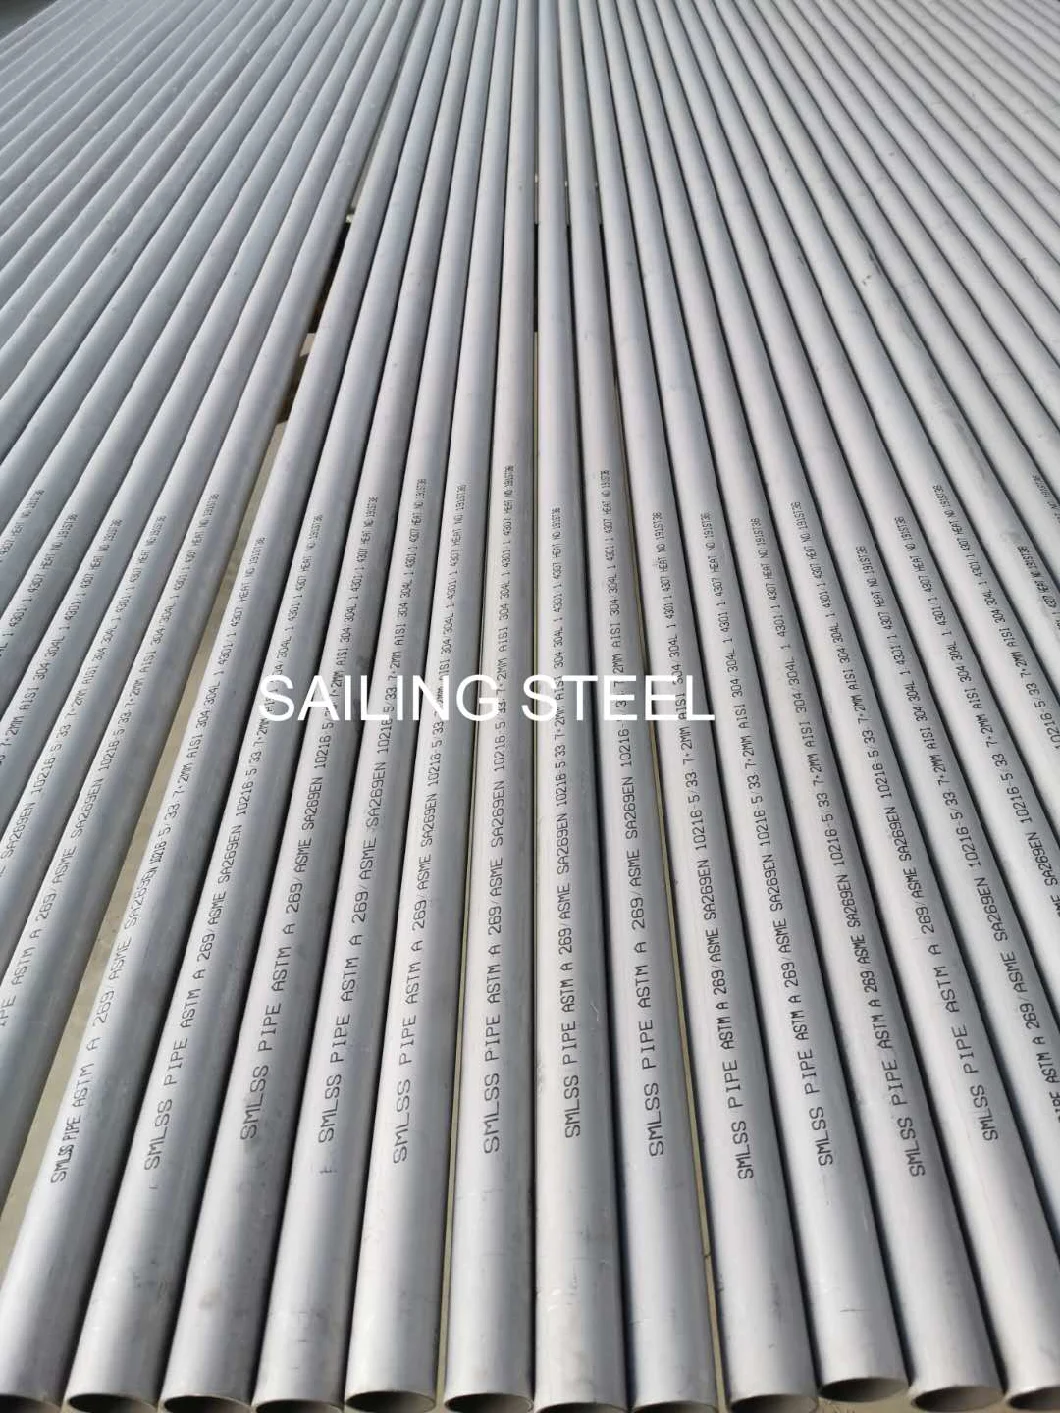 AISI 304/ 304L/ 316L/ 316ti/ Duplex Steel/ Ni-Based Alloy Stainless Steel Seamless Pipe